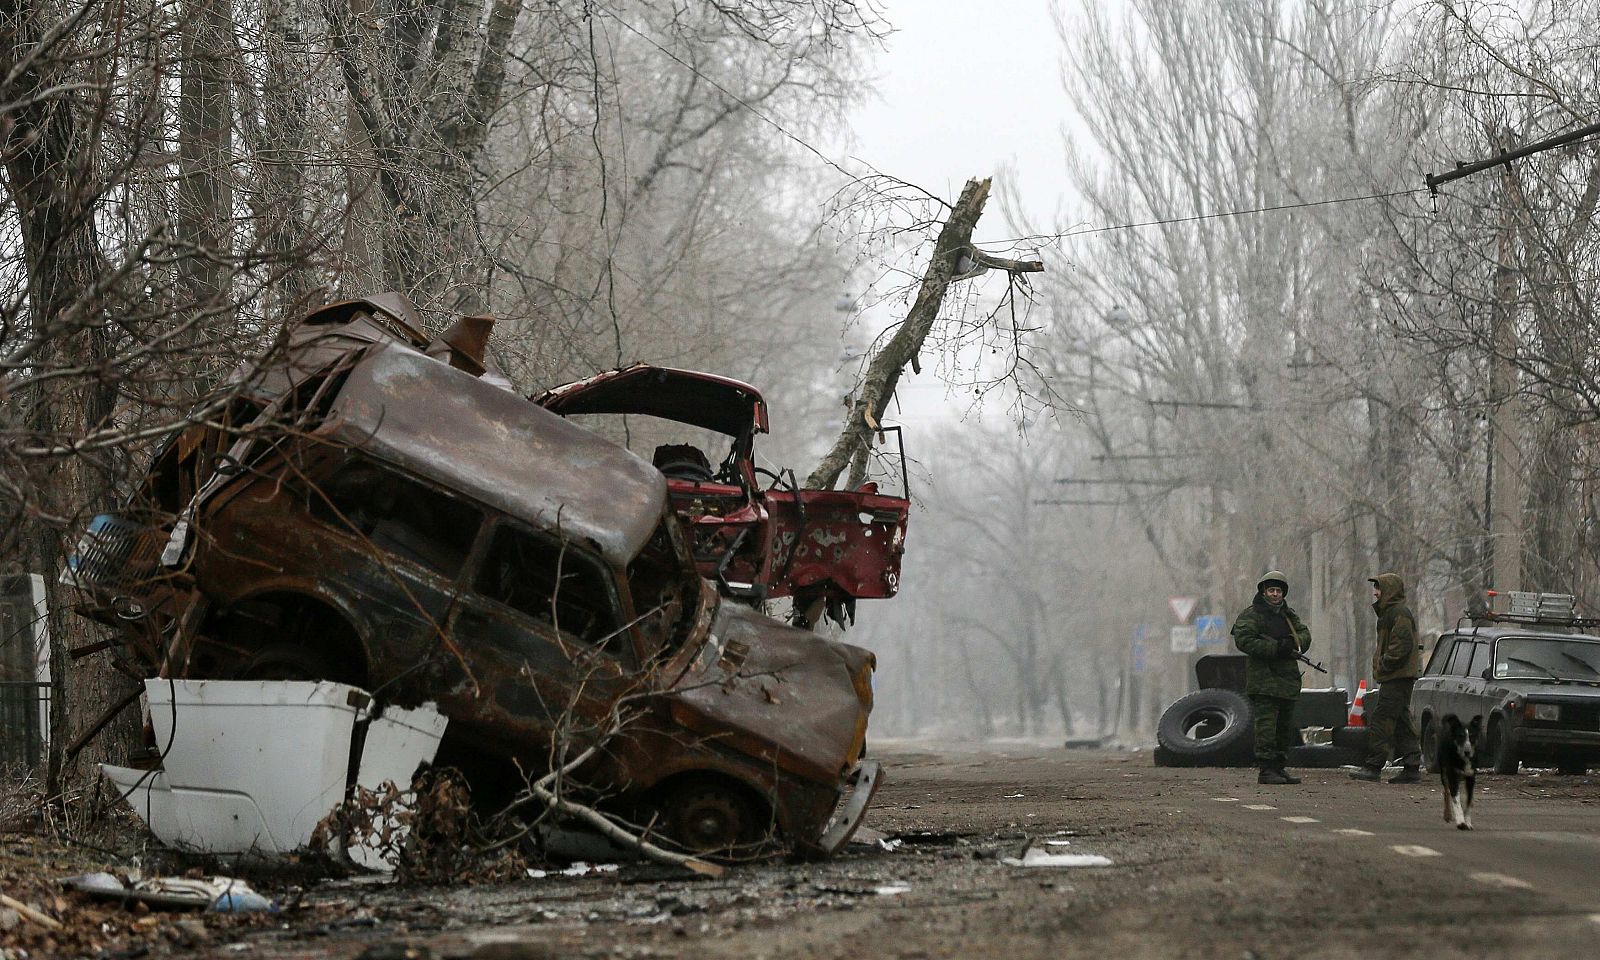 Pro-Russian separatists stand guard next to cars damaged during fighting between pro-Russian rebels and Ukrainian government forces near Donetsk Sergey Prokofiev International Airport, eastern Ukraine